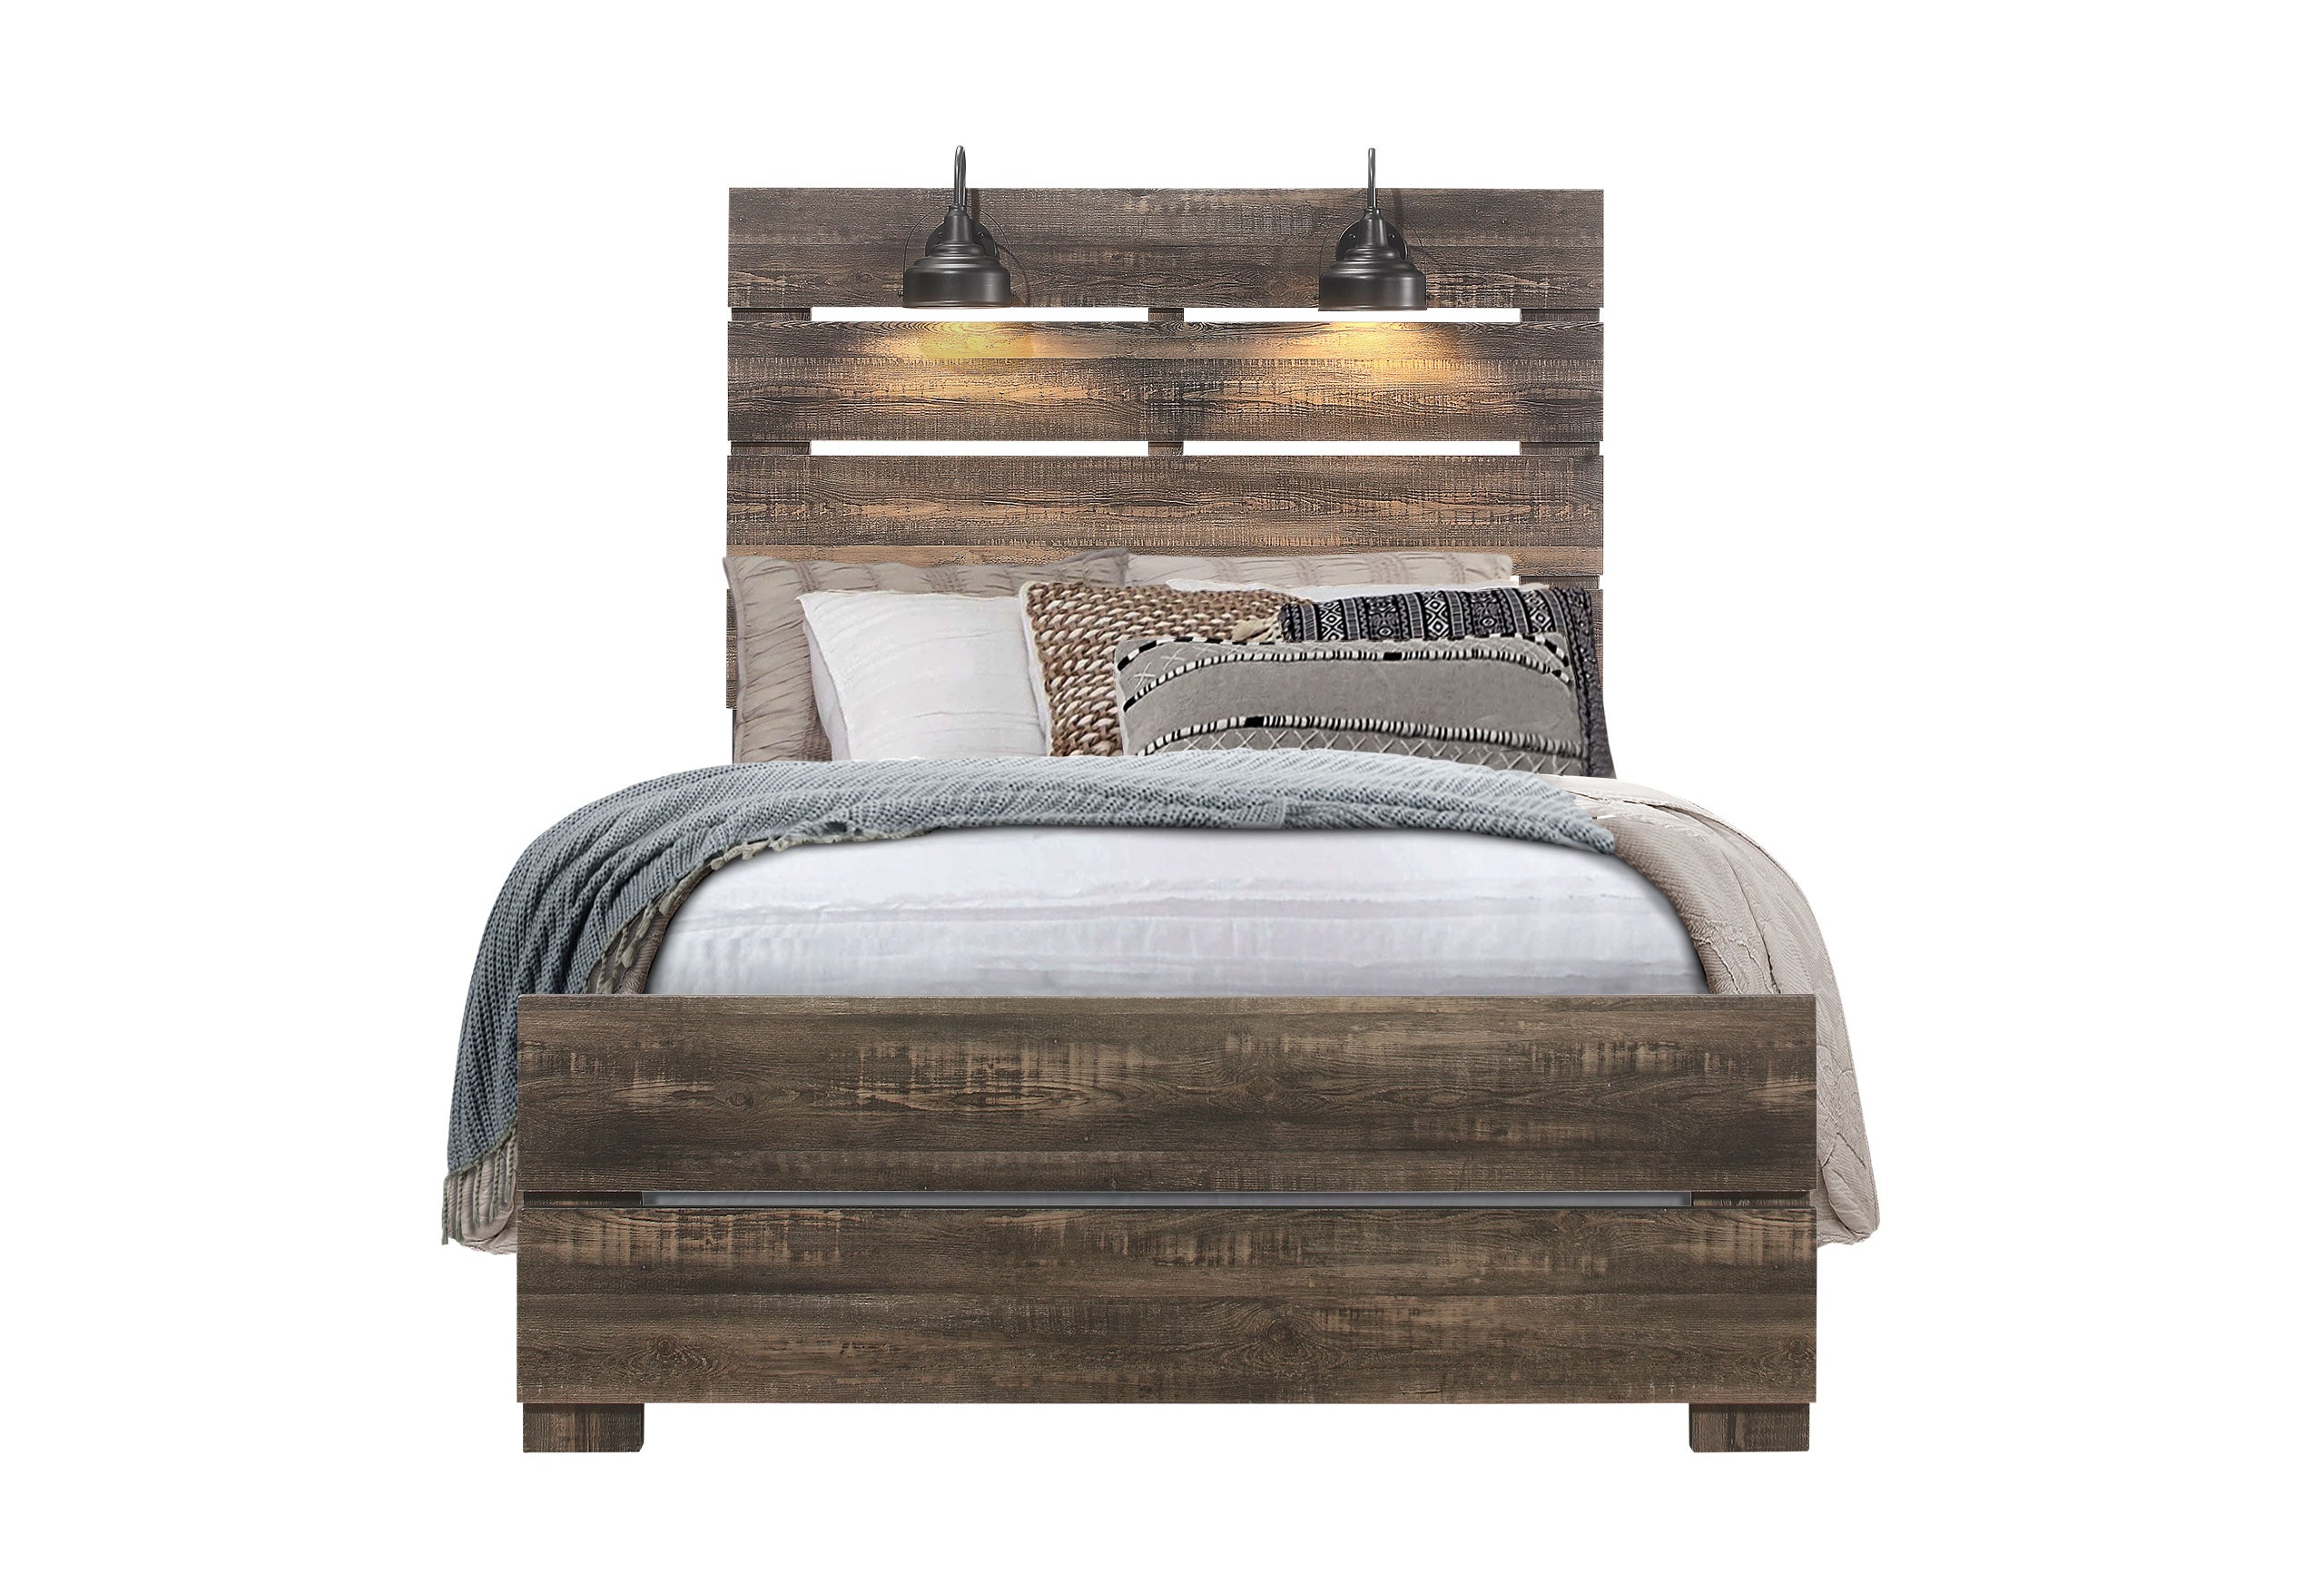 LINWOOD - BOOKCASE TWIN BED, FULL BED WITH LAMPS, KING BED WITH LAMPS, QUEEN BED WITH LAMPS, FULL BED WITH LAMPS, KING BED WITH LAMPS, QUEEN BED WITH LAMPS